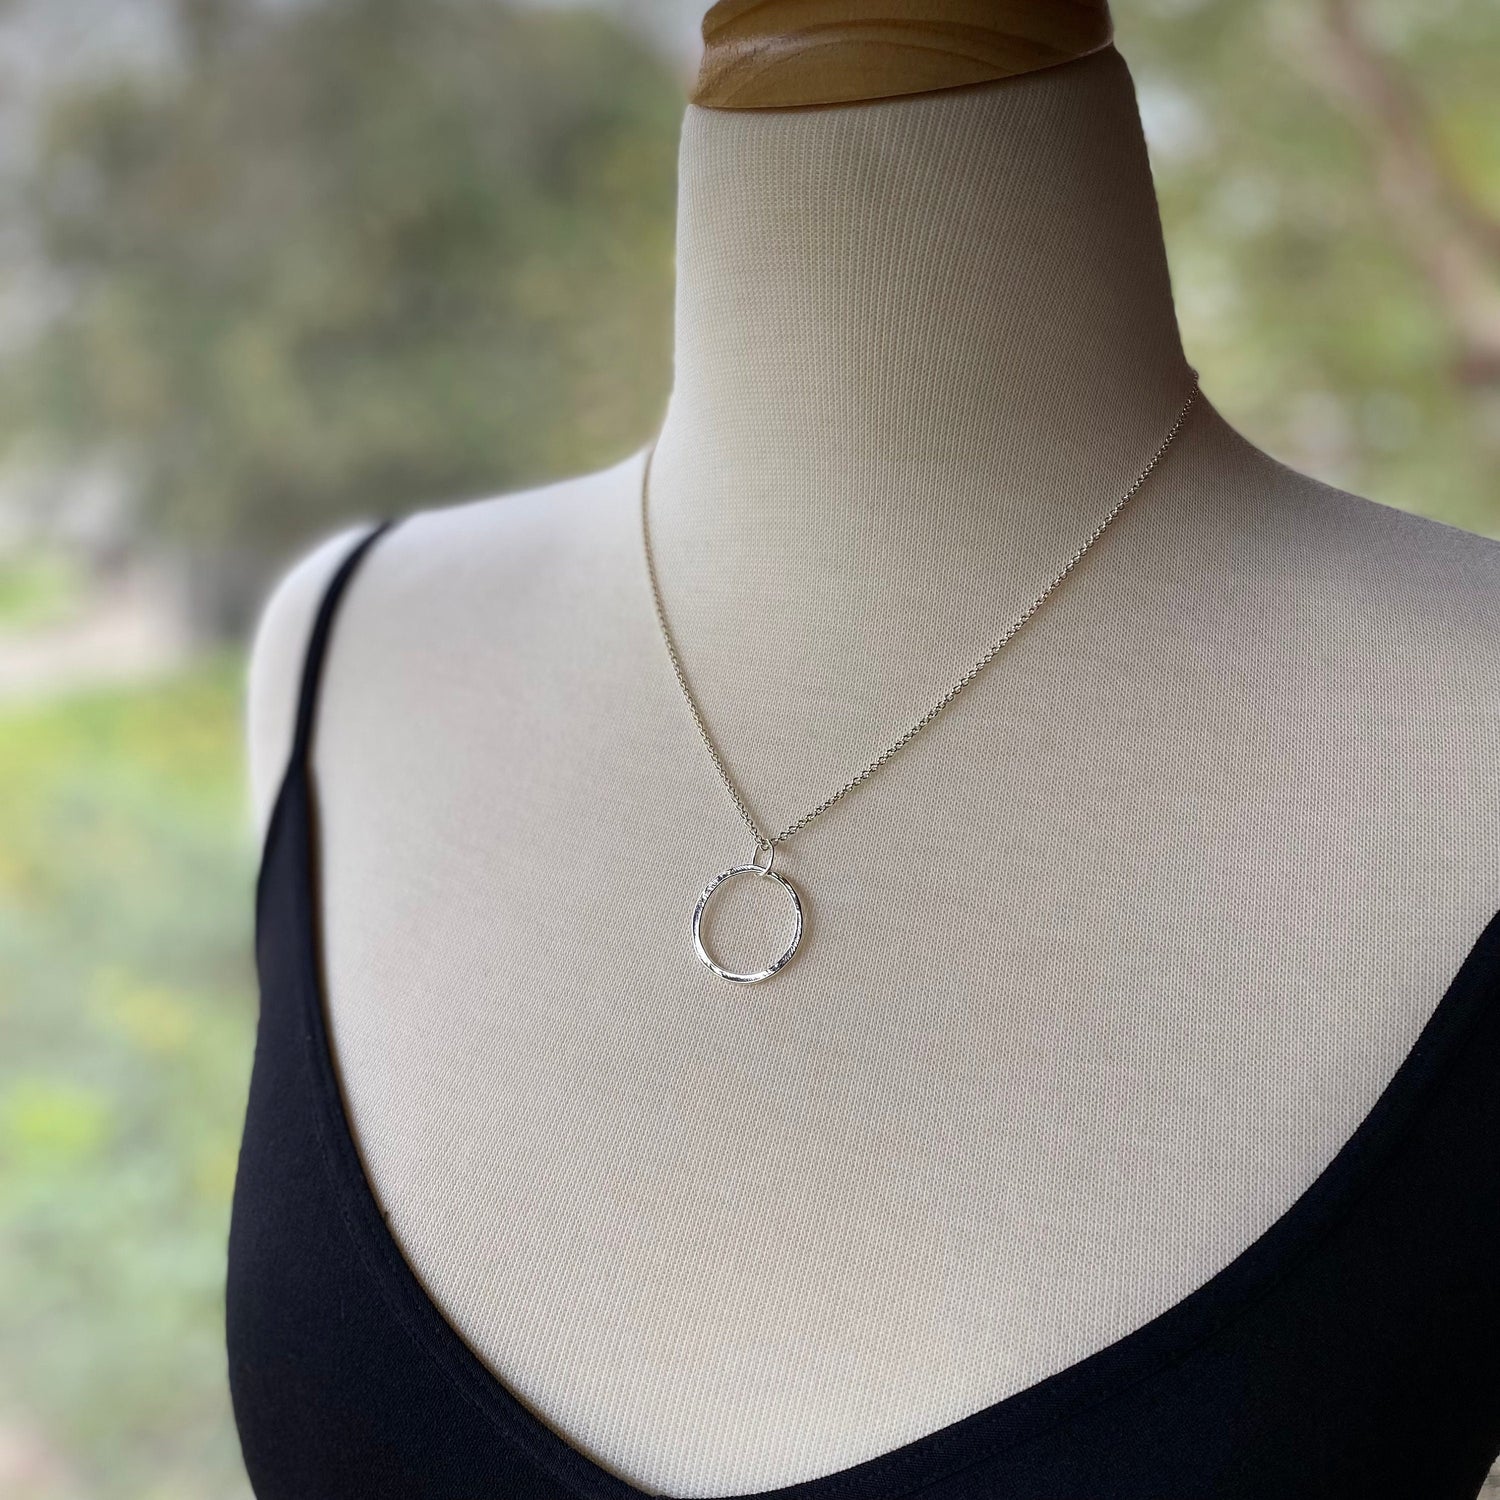 Rustic Hammered Sterling Silver Single Circle Handmade Pendant on Sterling Silver Cable Chain, Everyday Bohemian Elegance